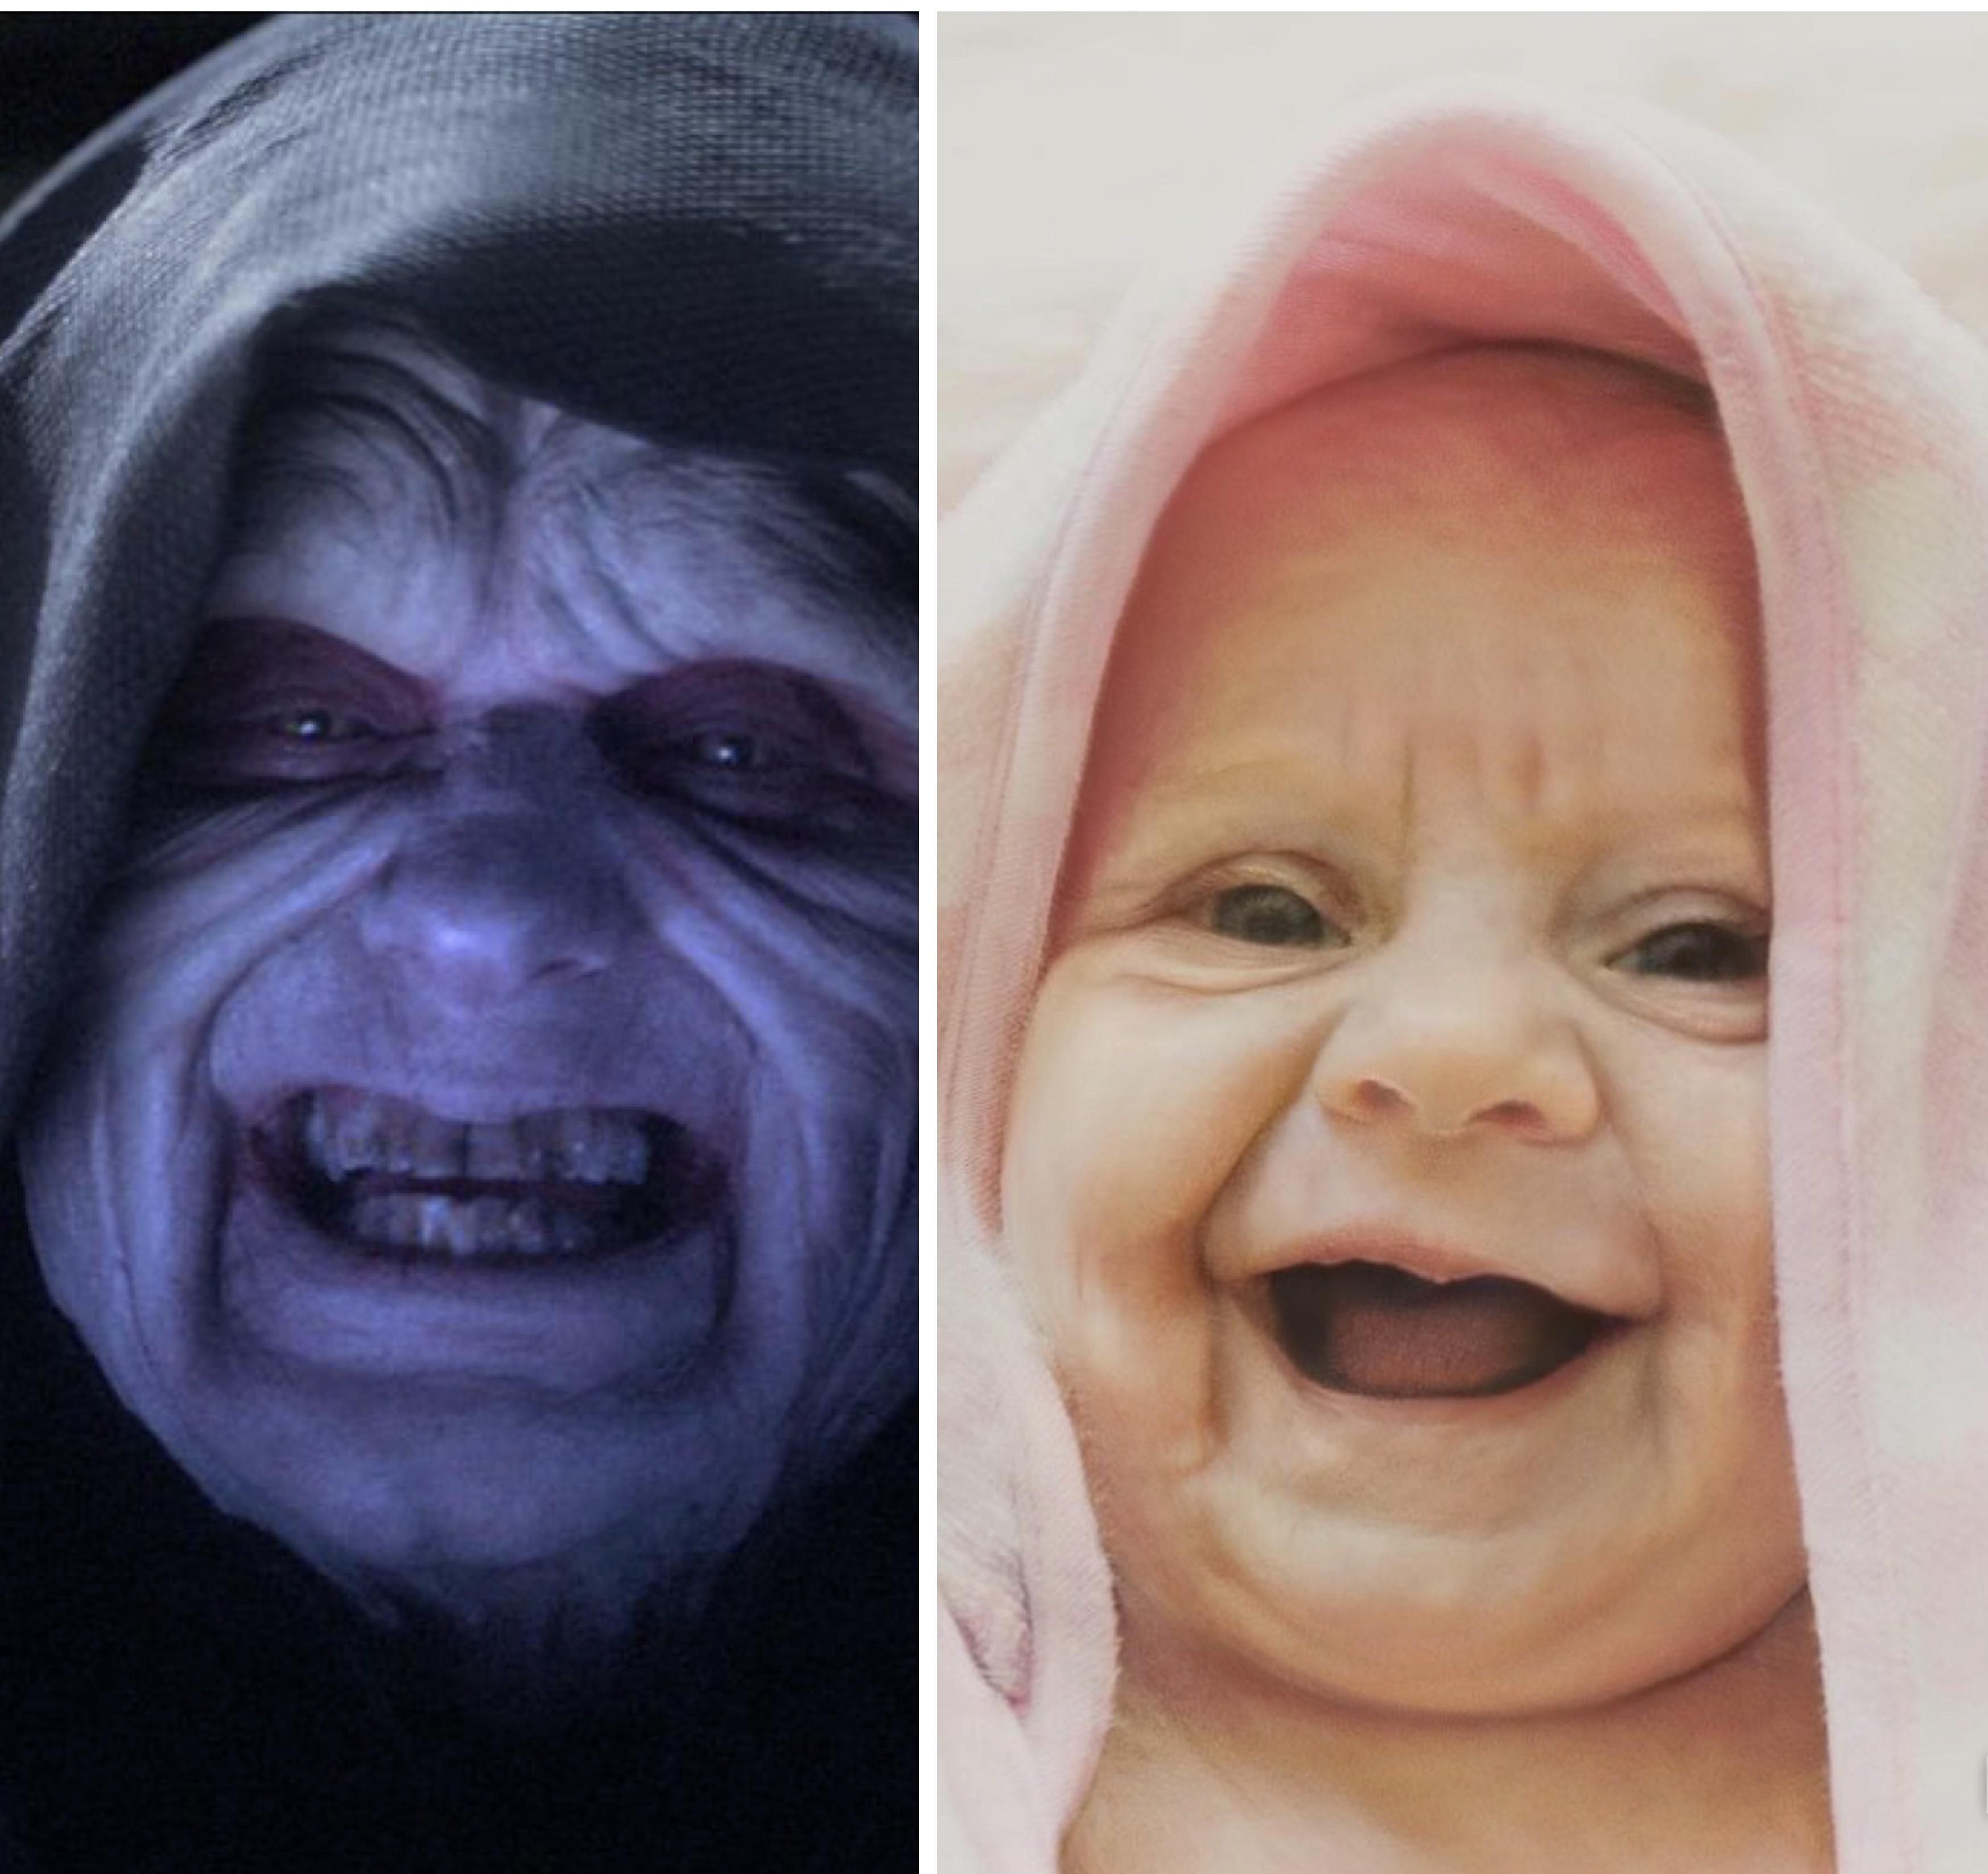 A friend posted a pic of her baby and it reminded me of someone. A little FaceApp magic and boom.